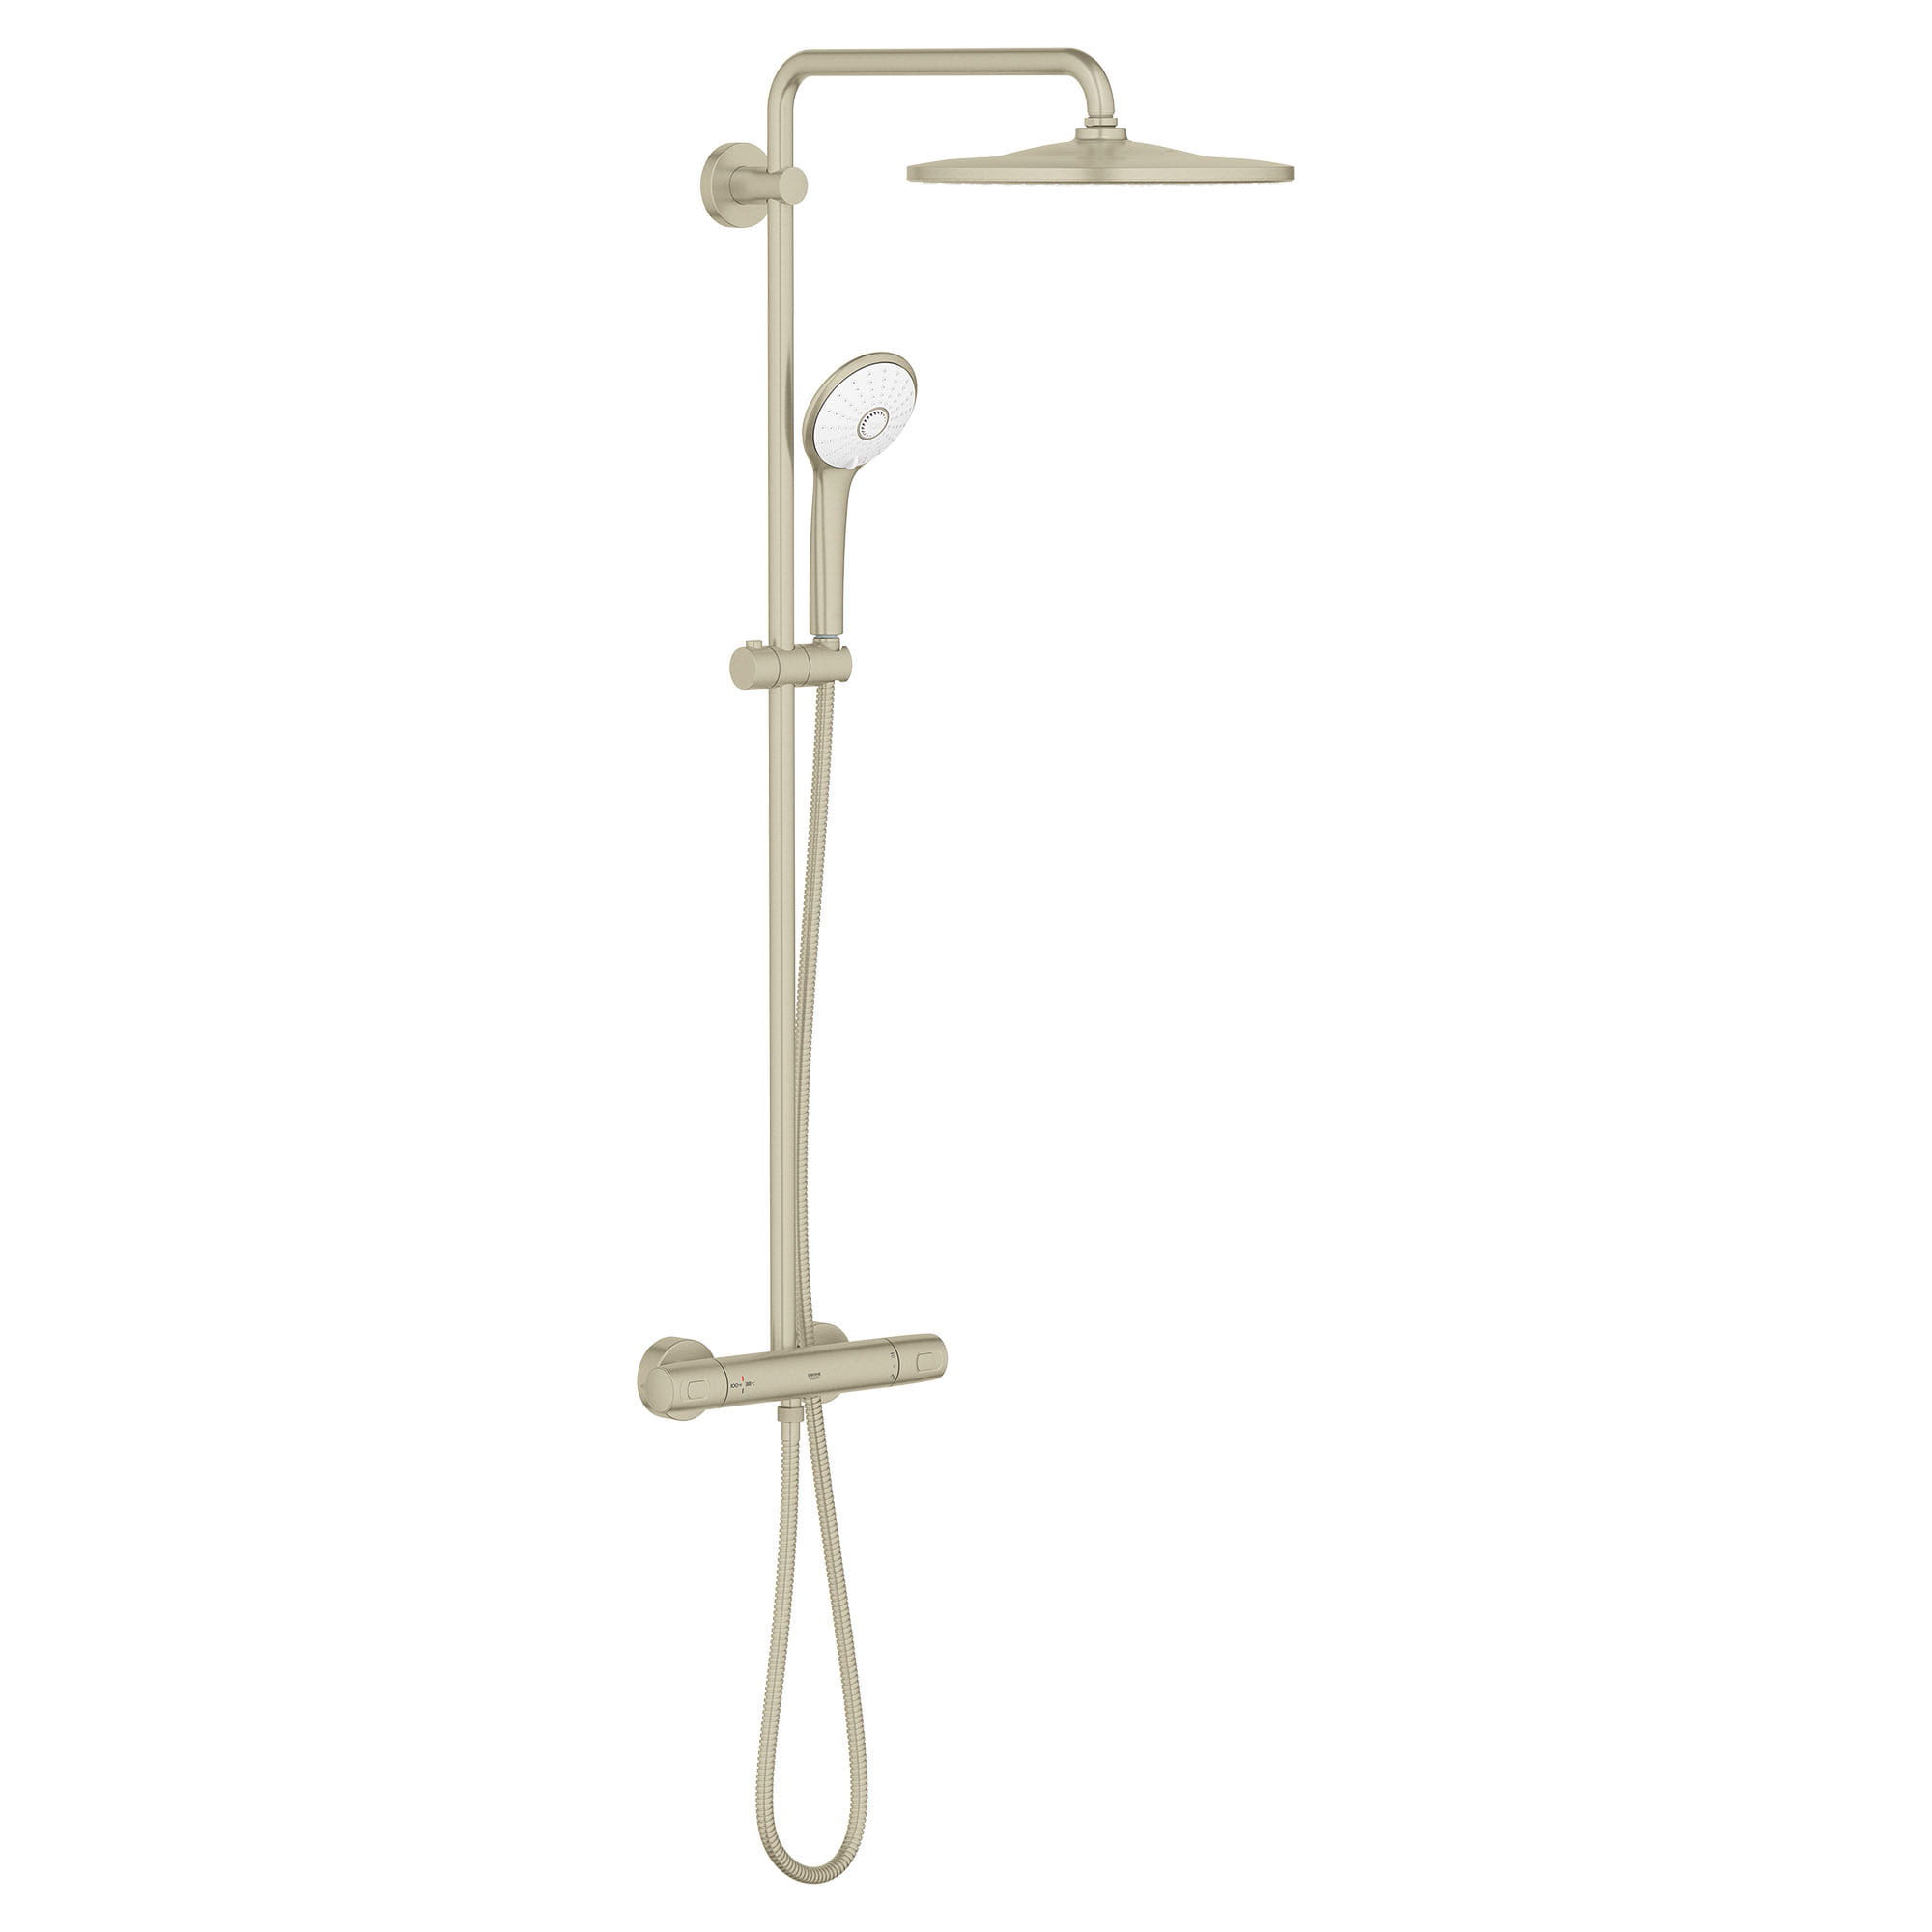 Euphoria 310 CoolTouch Shower System W/Showerhead and Hand Shower In Nickel